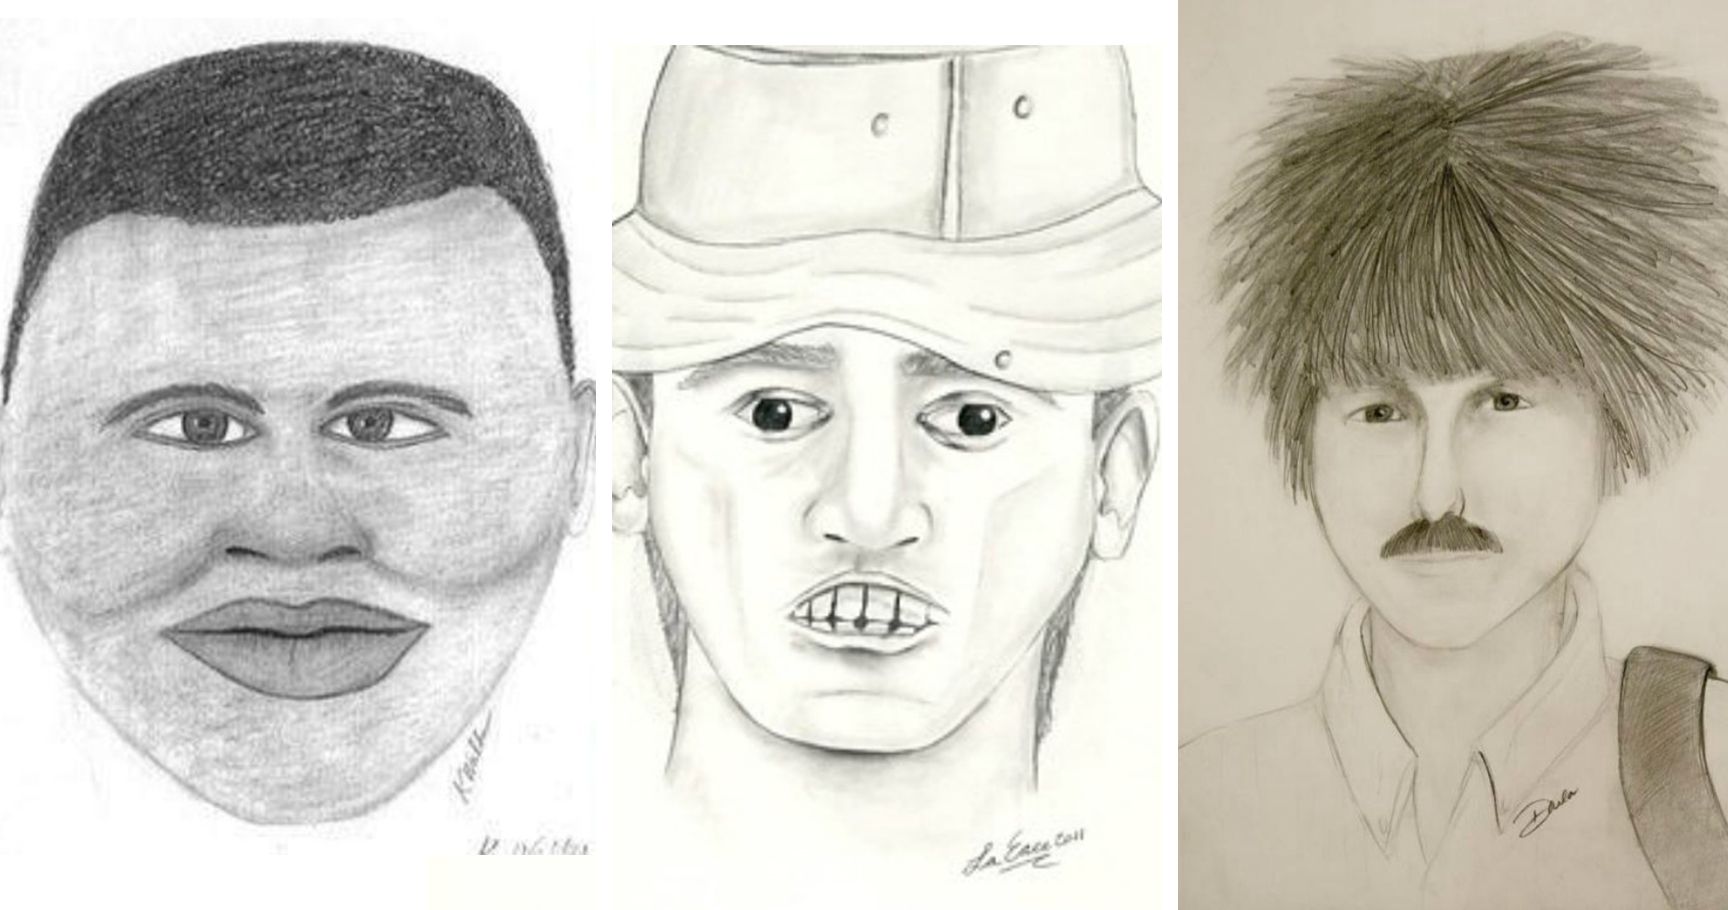  Police Sketch Artist Drawings Funny for Kids